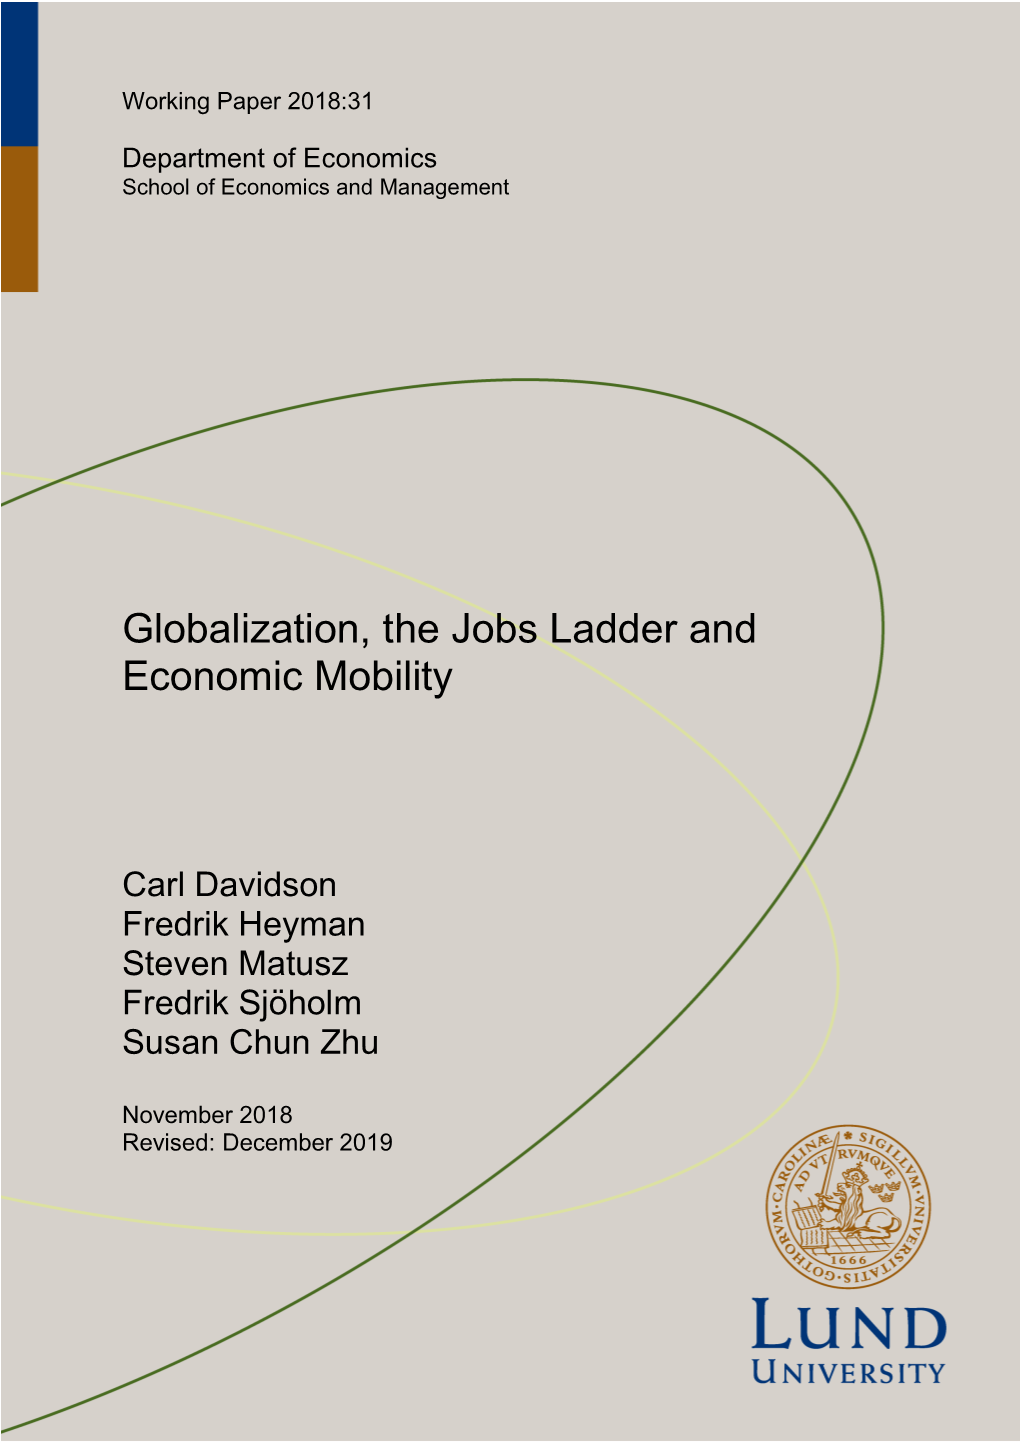 Globalization, the Jobs Ladder and Economic Mobility